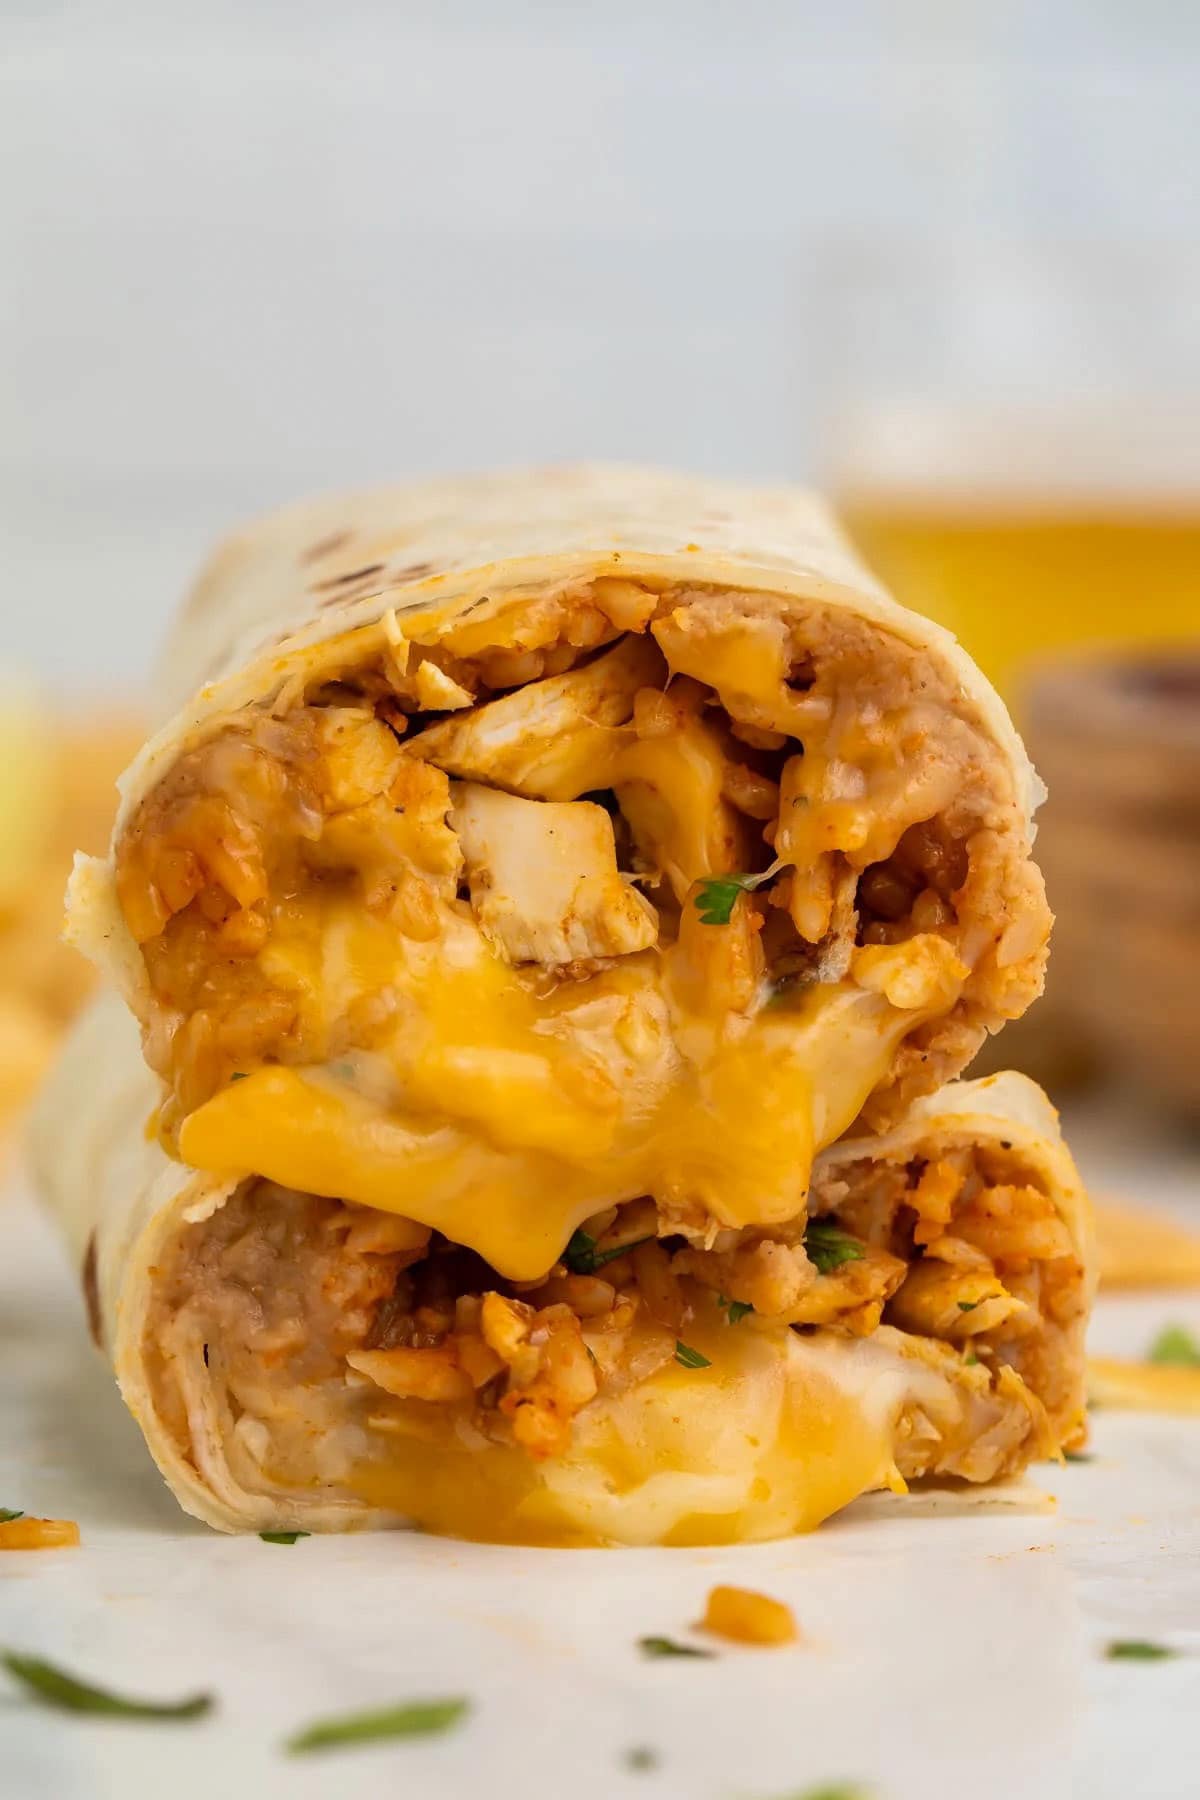 Two halves of a bean and chicken burrito with melted cheese, stacked on top of each other to show the filling inside.